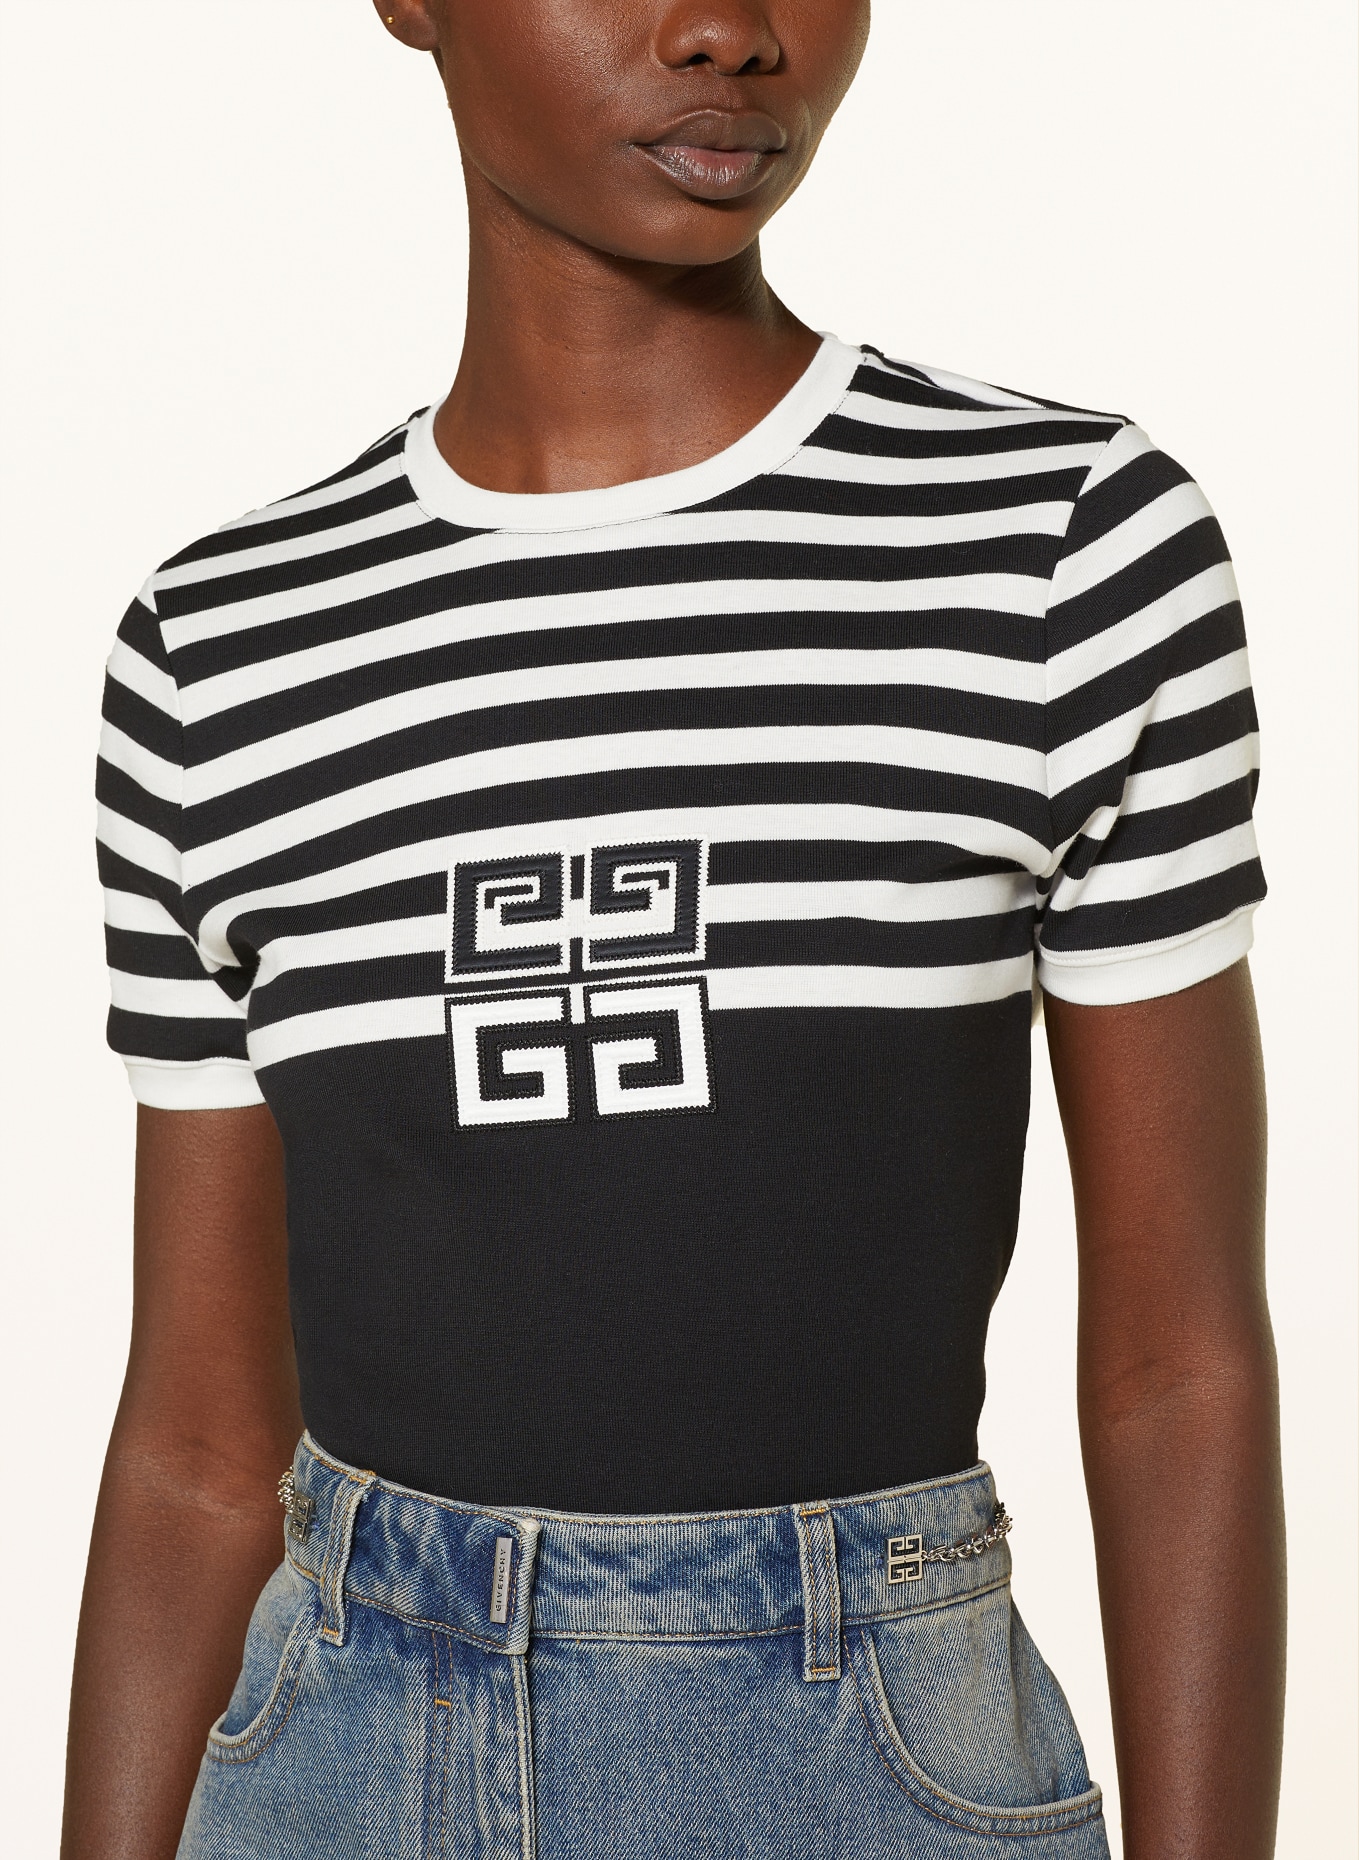 GIVENCHY T-shirt, Color: BLACK/ WHITE (Image 4)